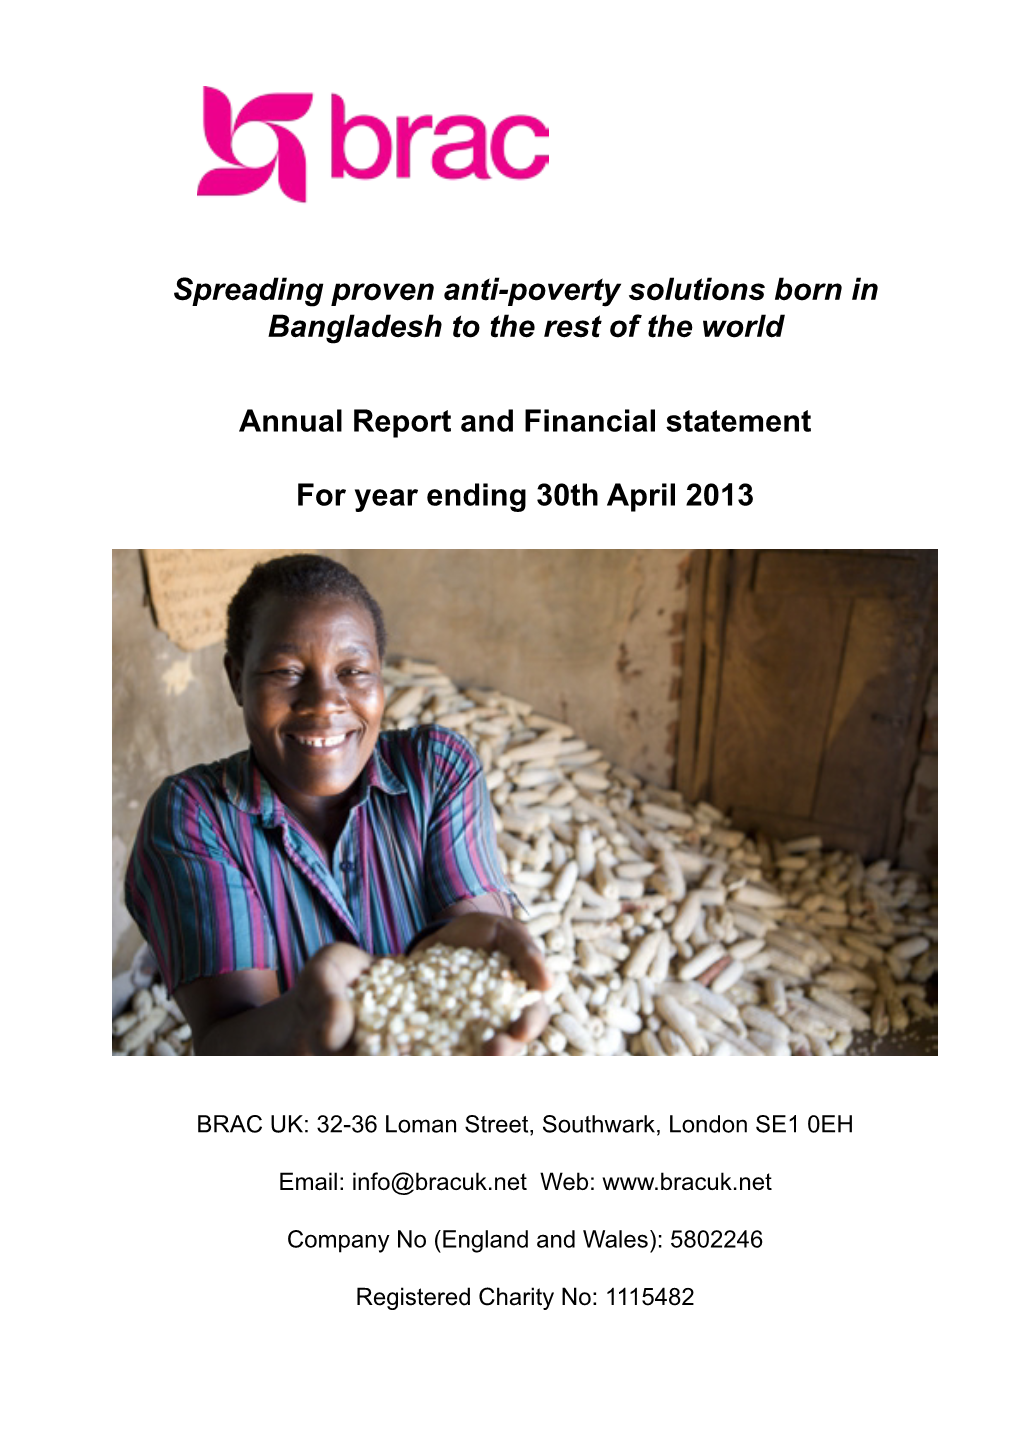 Spreading Proven Anti-Poverty Solutions Born in Bangladesh to the Rest of the World Annual Report and Financial Statement for Ye